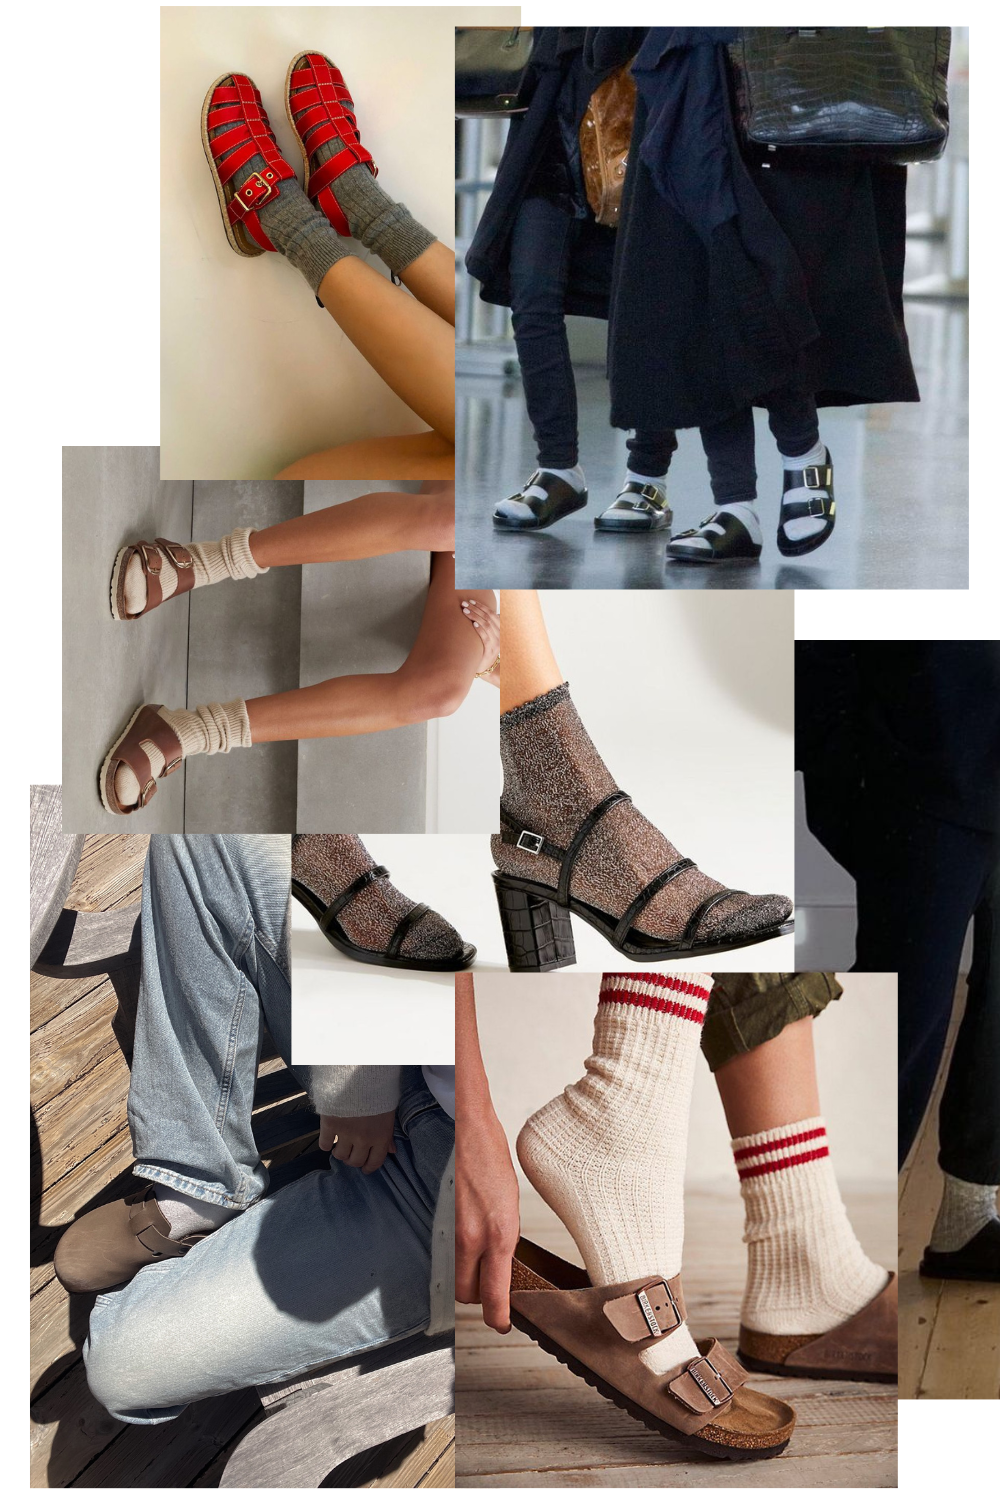 Collage of Socks and Sandals for Inspiration on how to style 